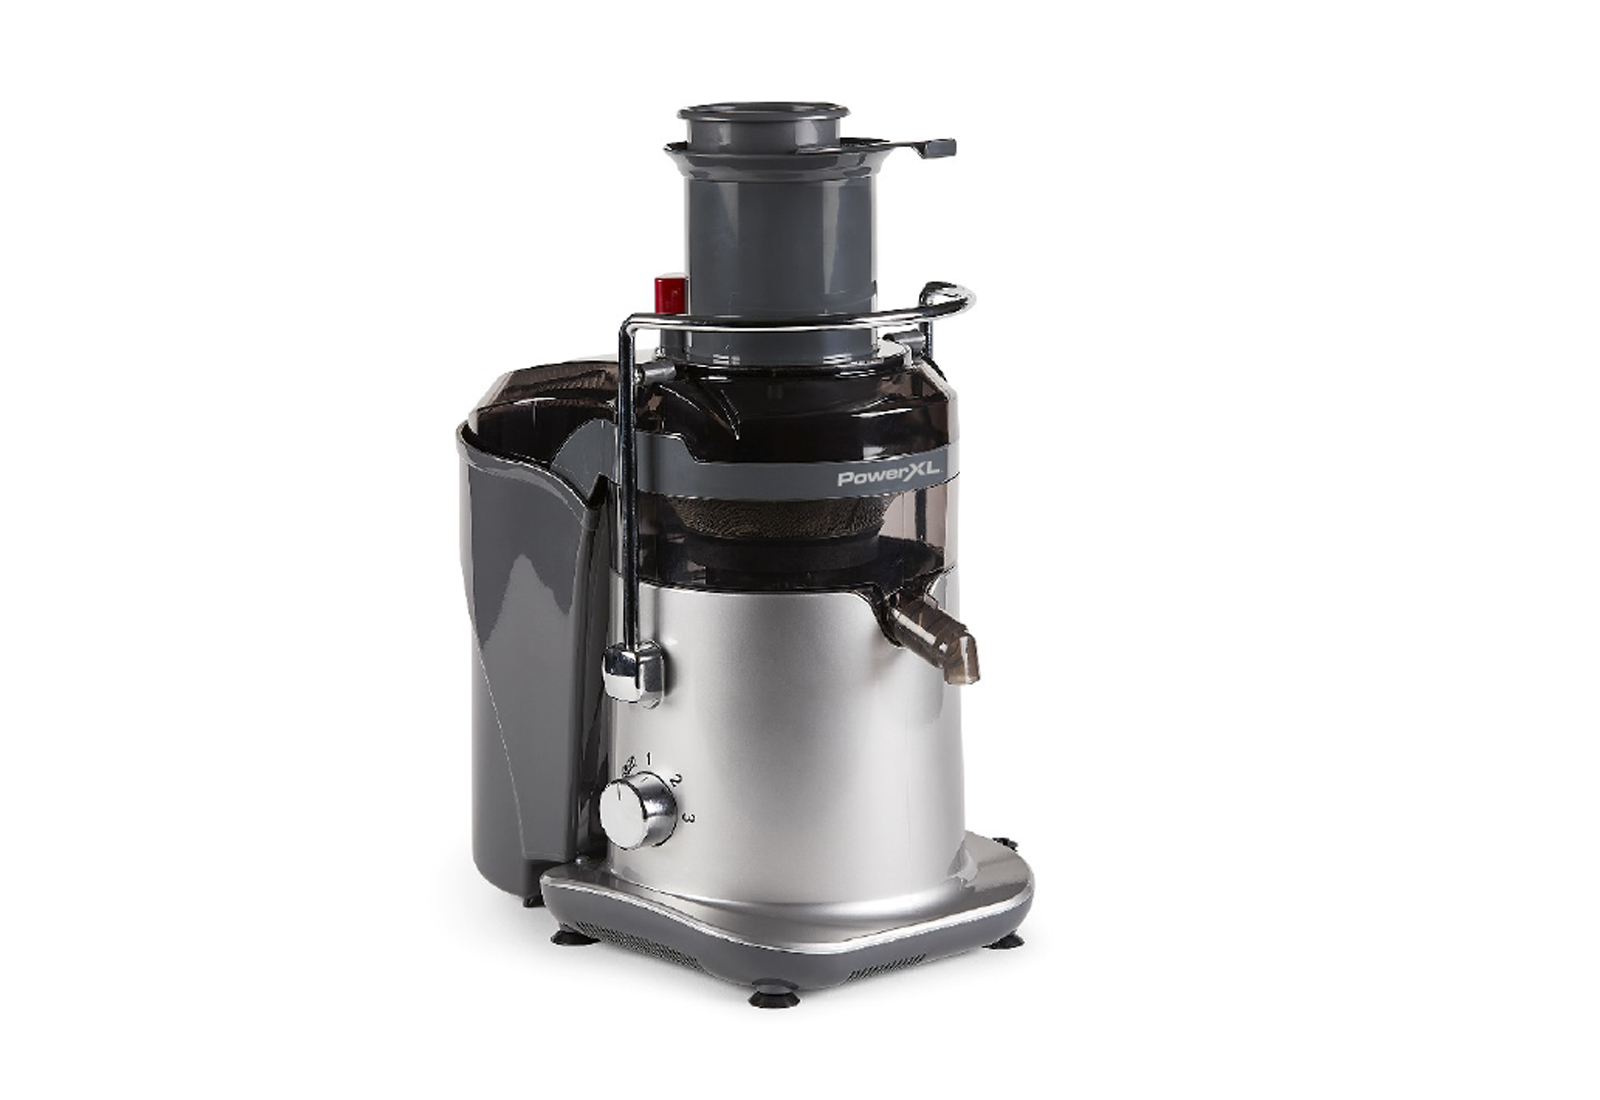 PowerXL Self Cleaning Juicer Product Image